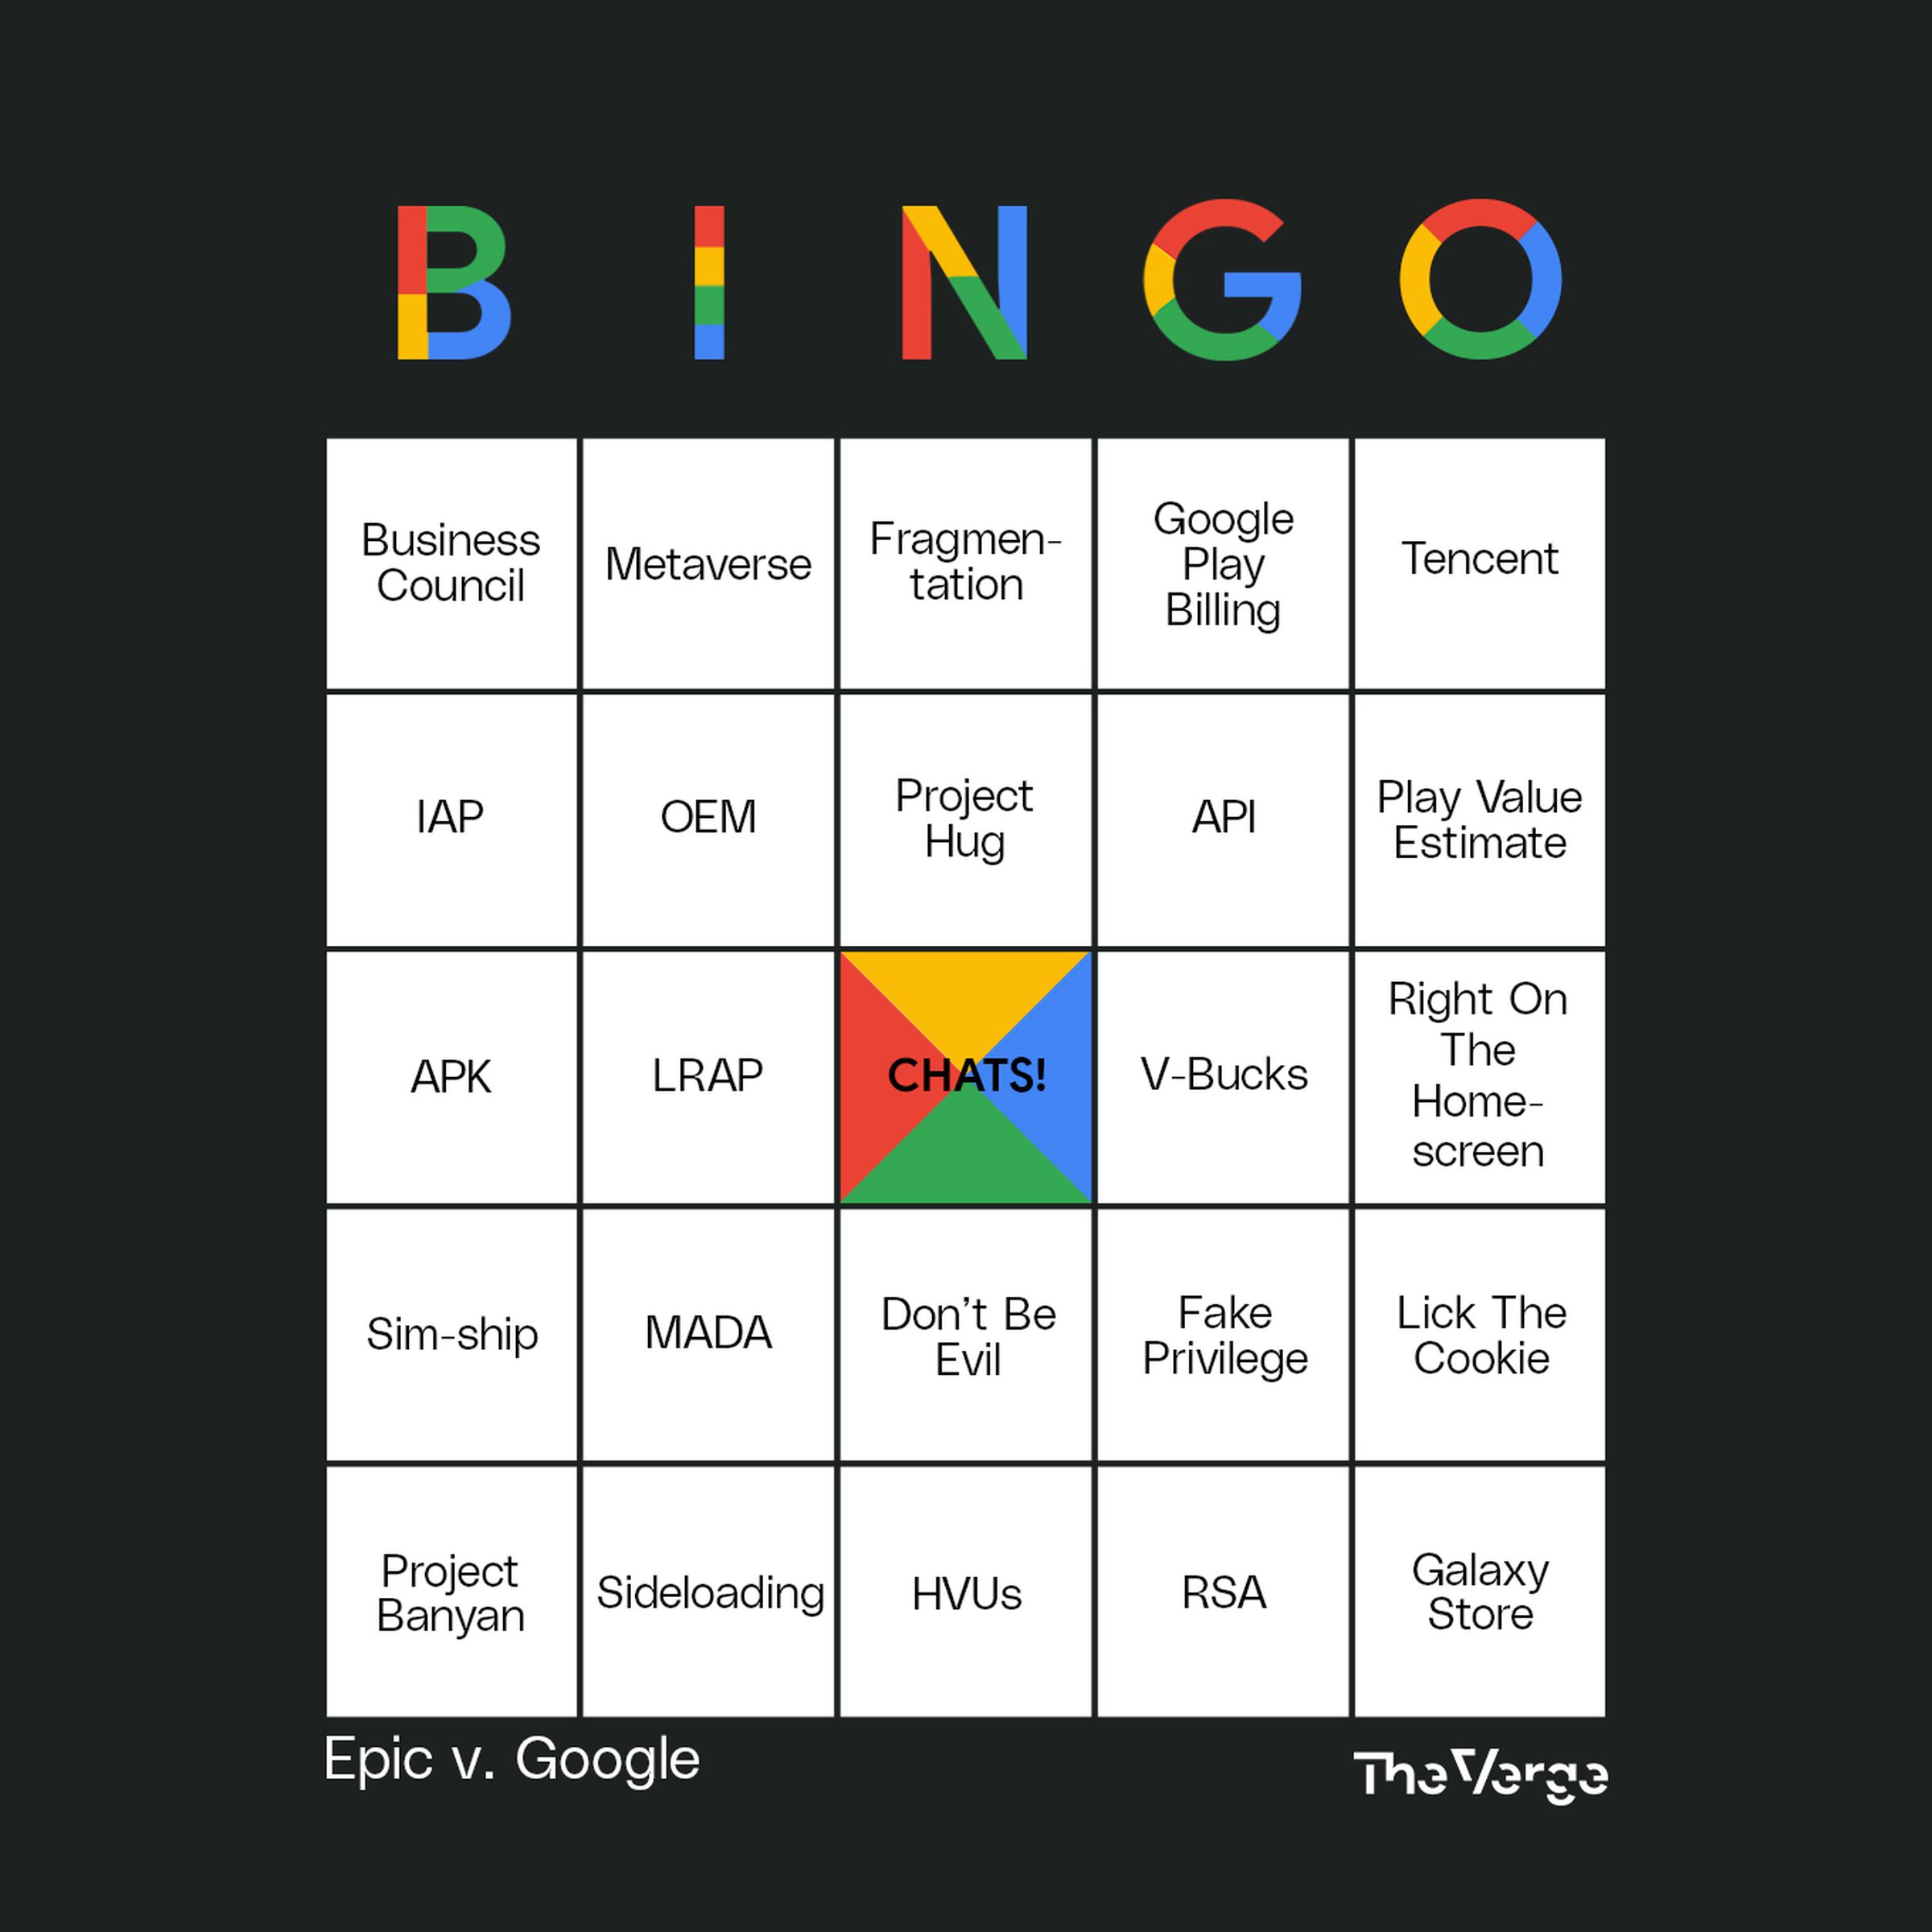 A bingo card featuring the terms used in the post glossary.